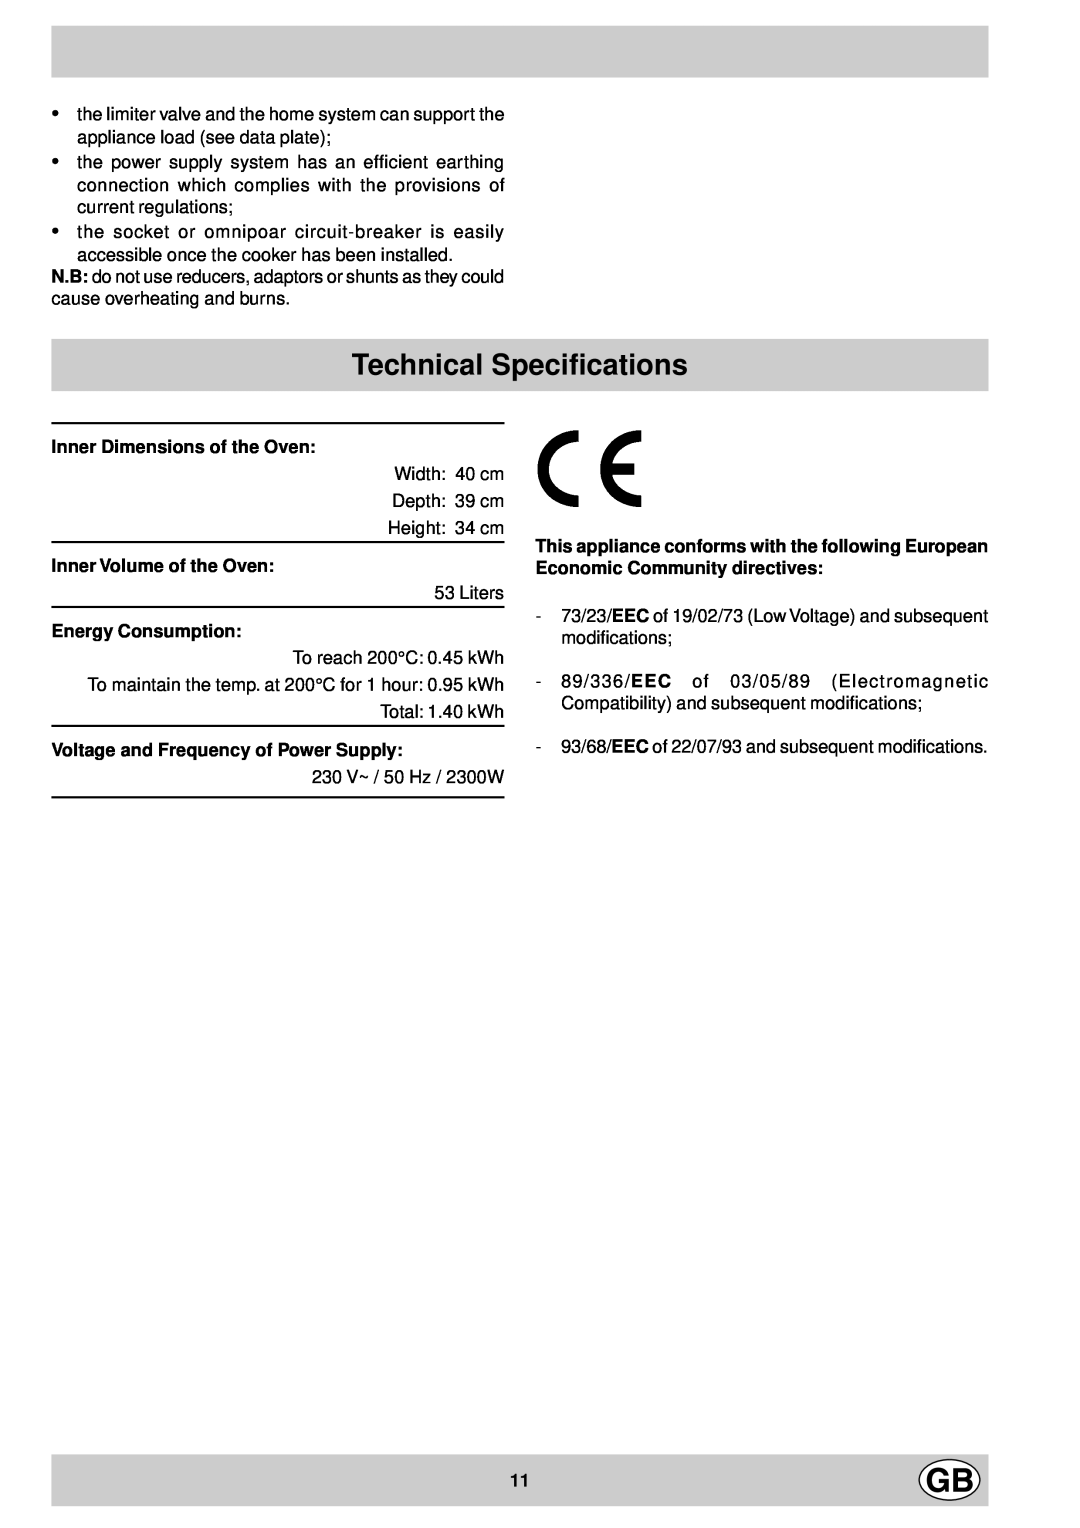 Indesit FM 37K IX DK Technical Specifications, Inner Dimensions of the Oven, Inner Volume of the Oven, Energy Consumption 